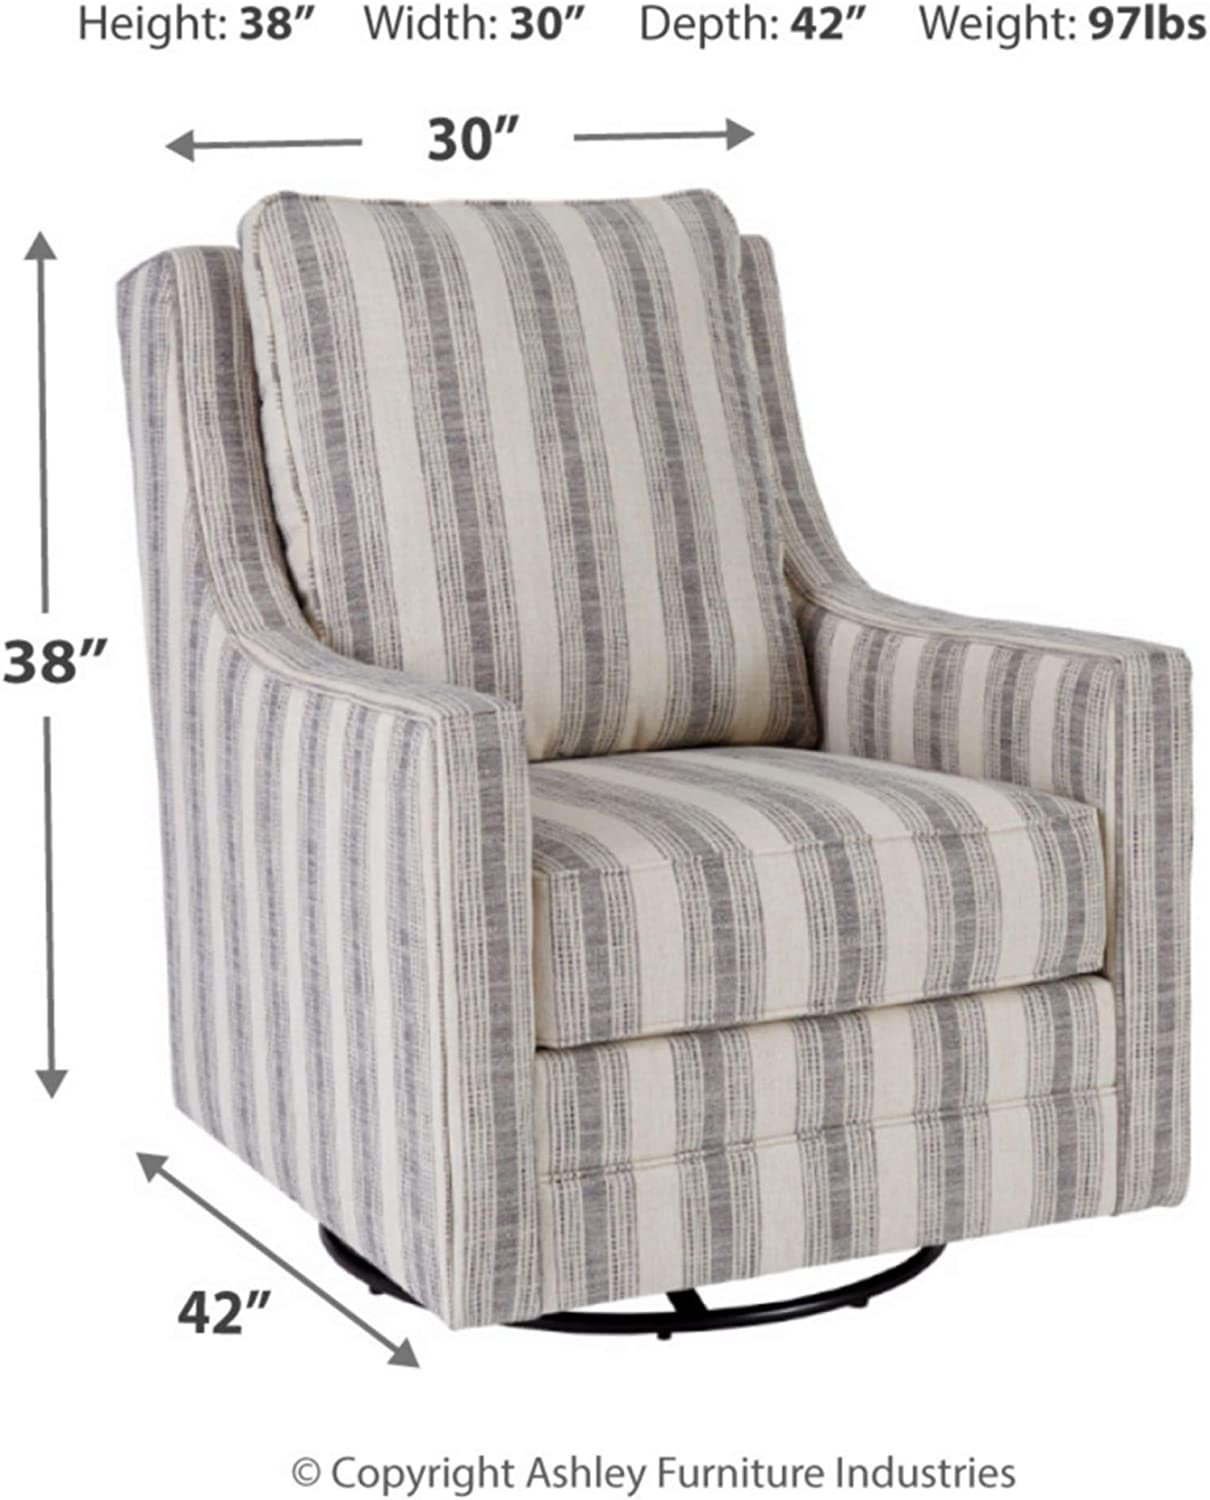 Signature Design Kambria Striped Upholstered Swivel Accent Glider Chair, Ivory & Black - $250